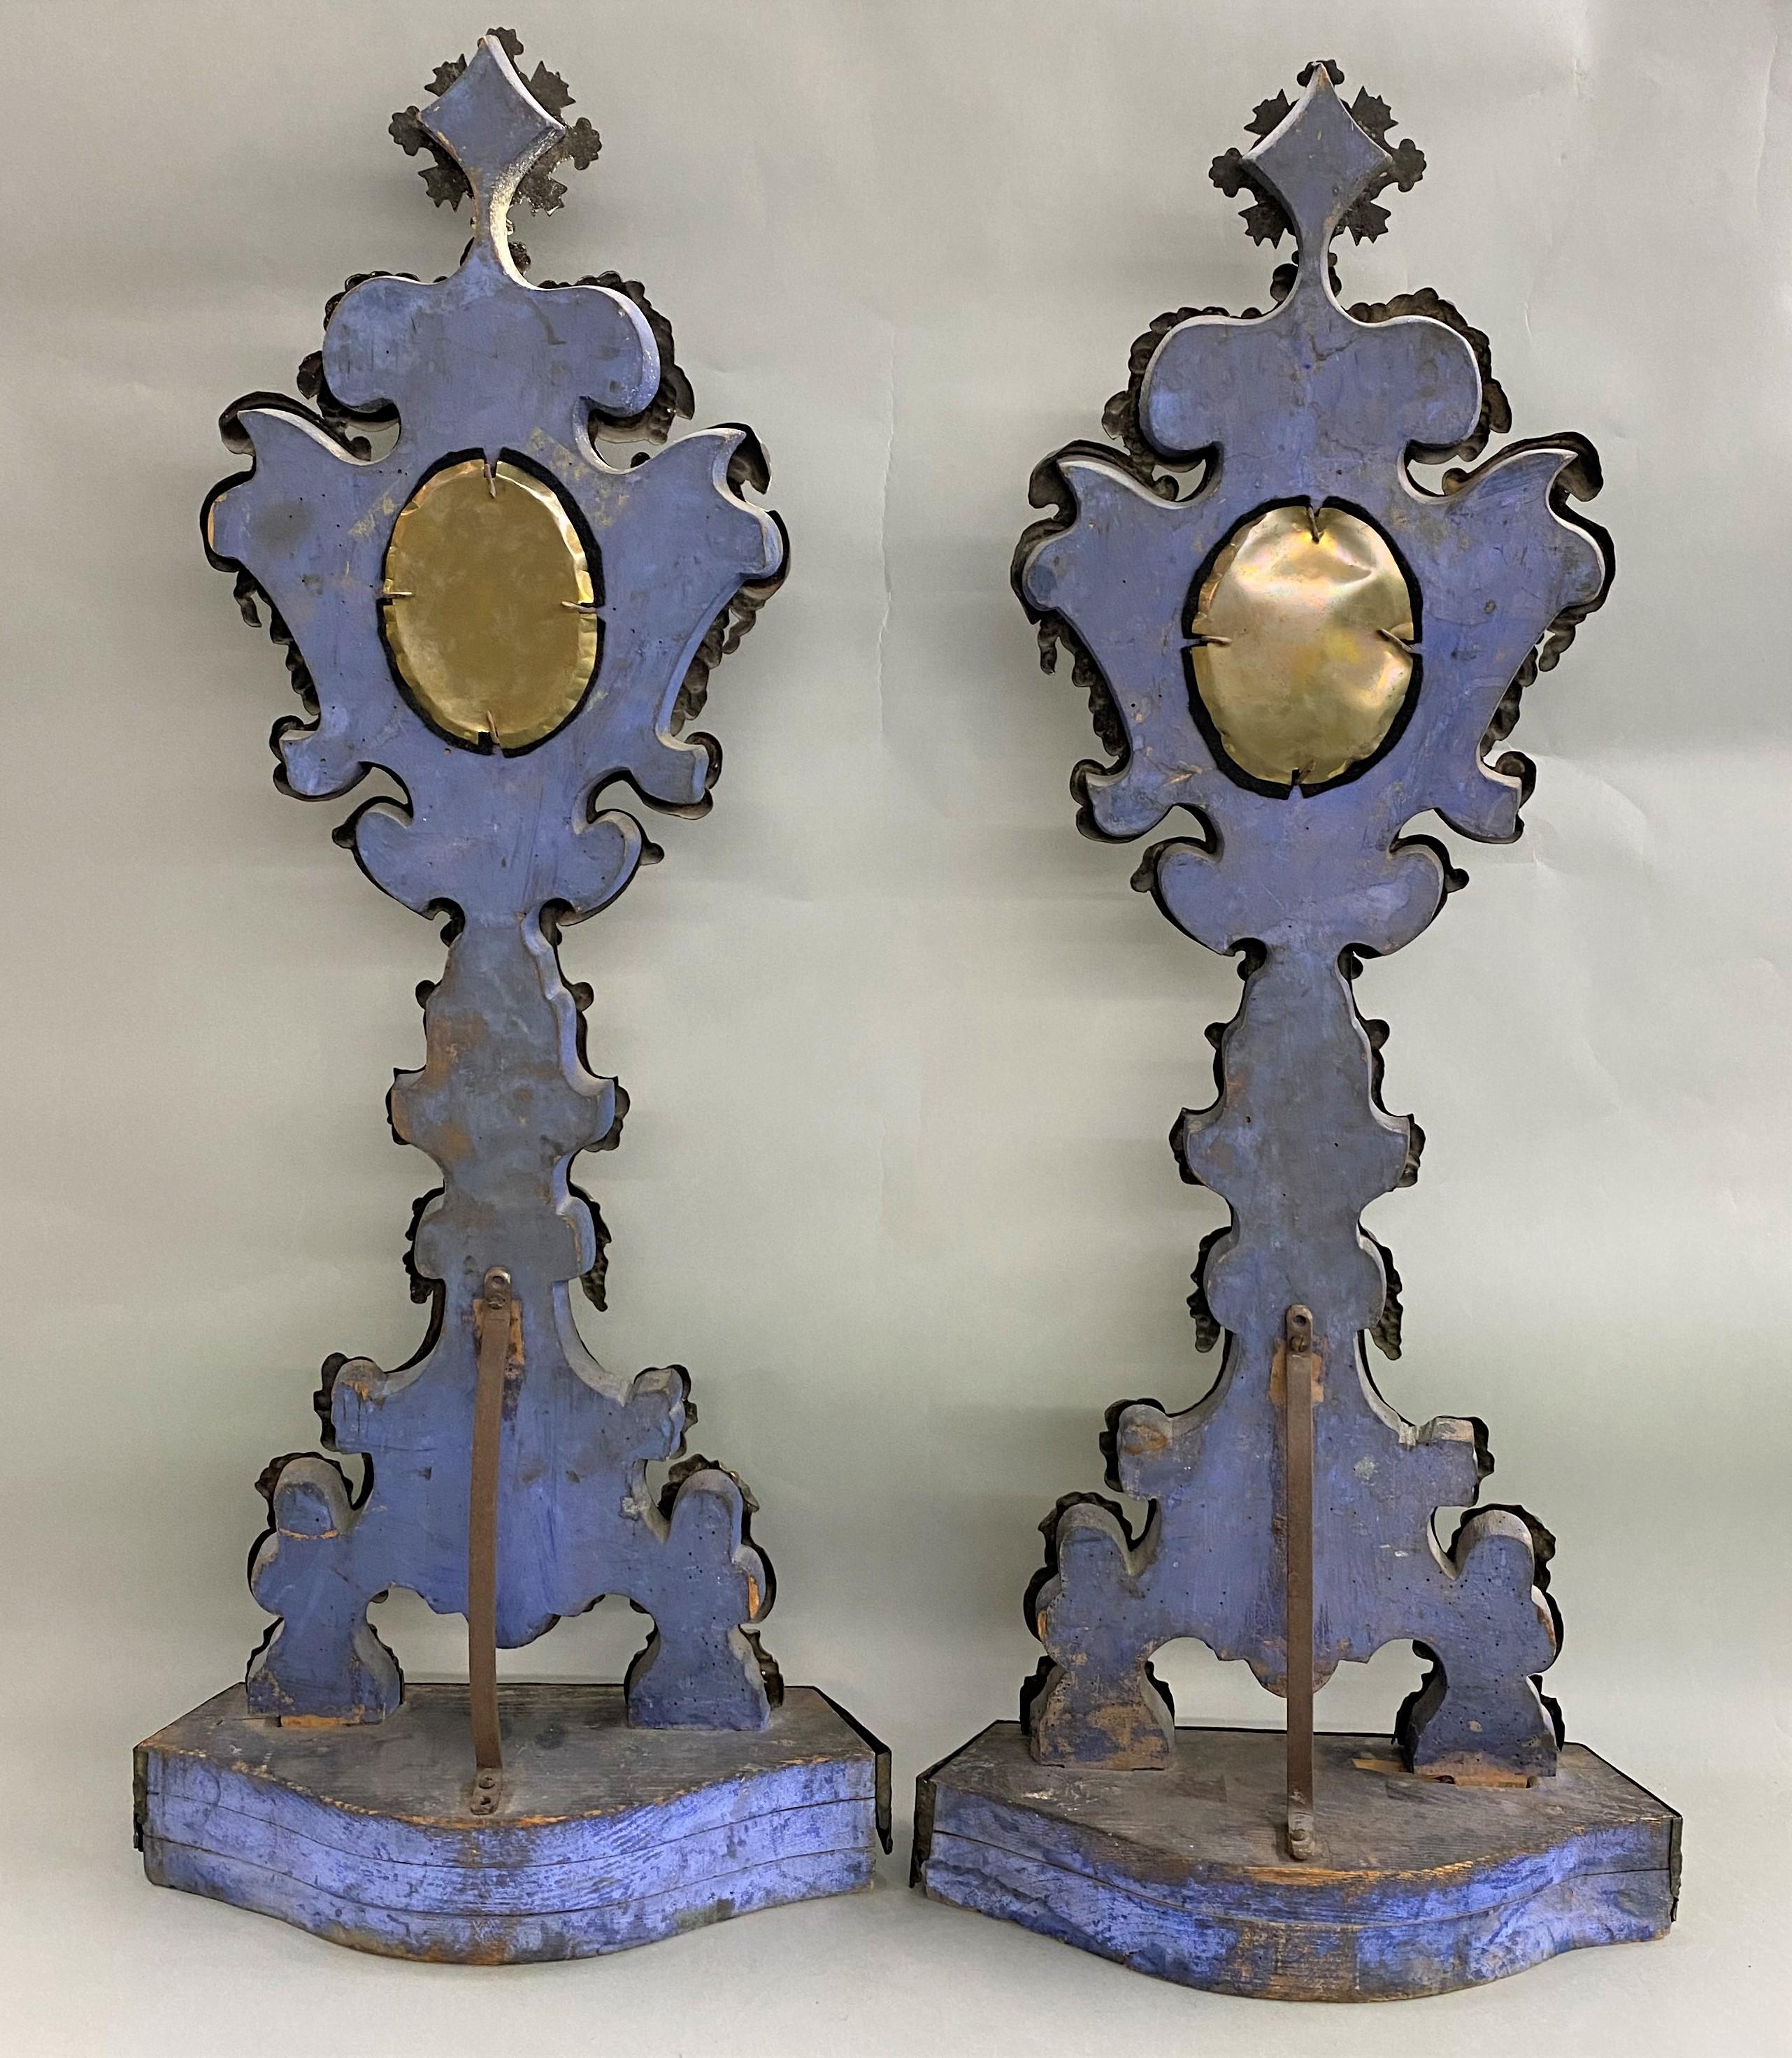 Large Pair of 18th / 19th Century Italian Silvered Reliquaries For Sale 4